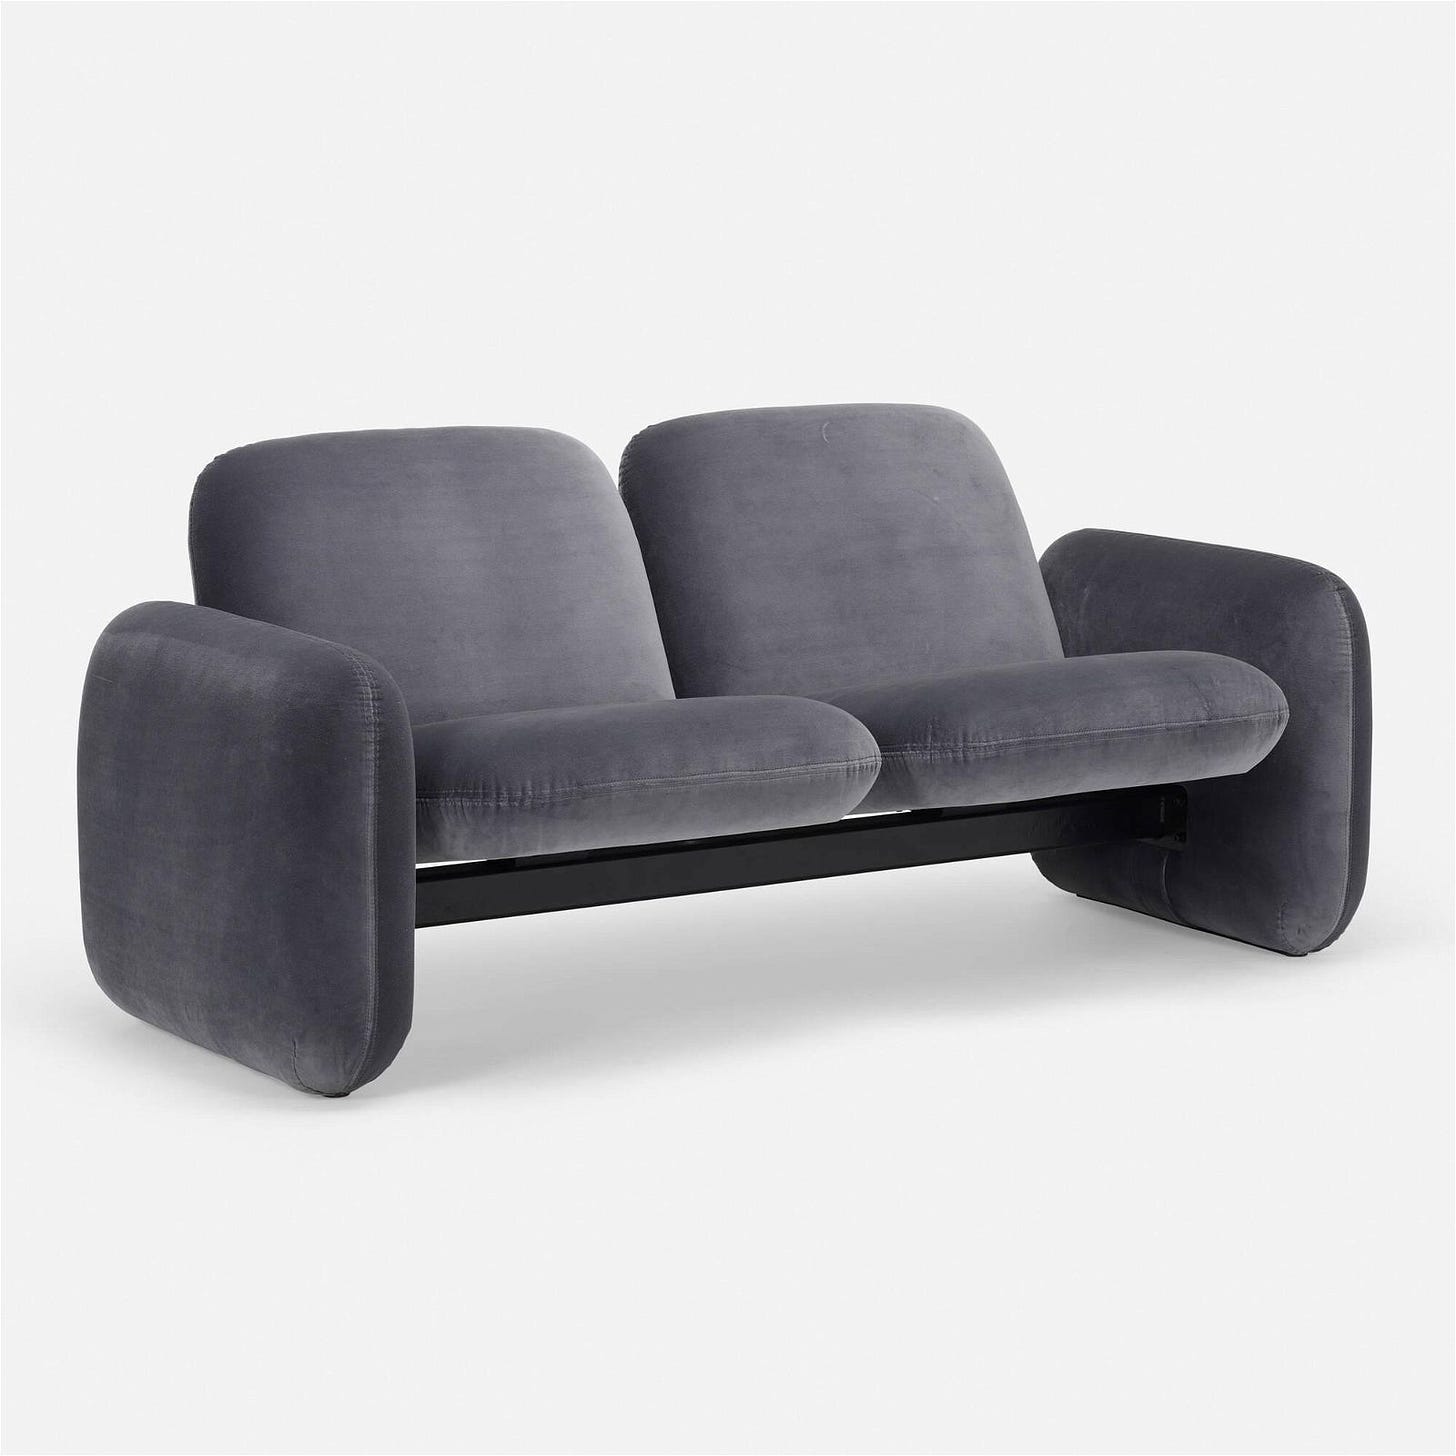 Ray Wilkes, Chiclet settee